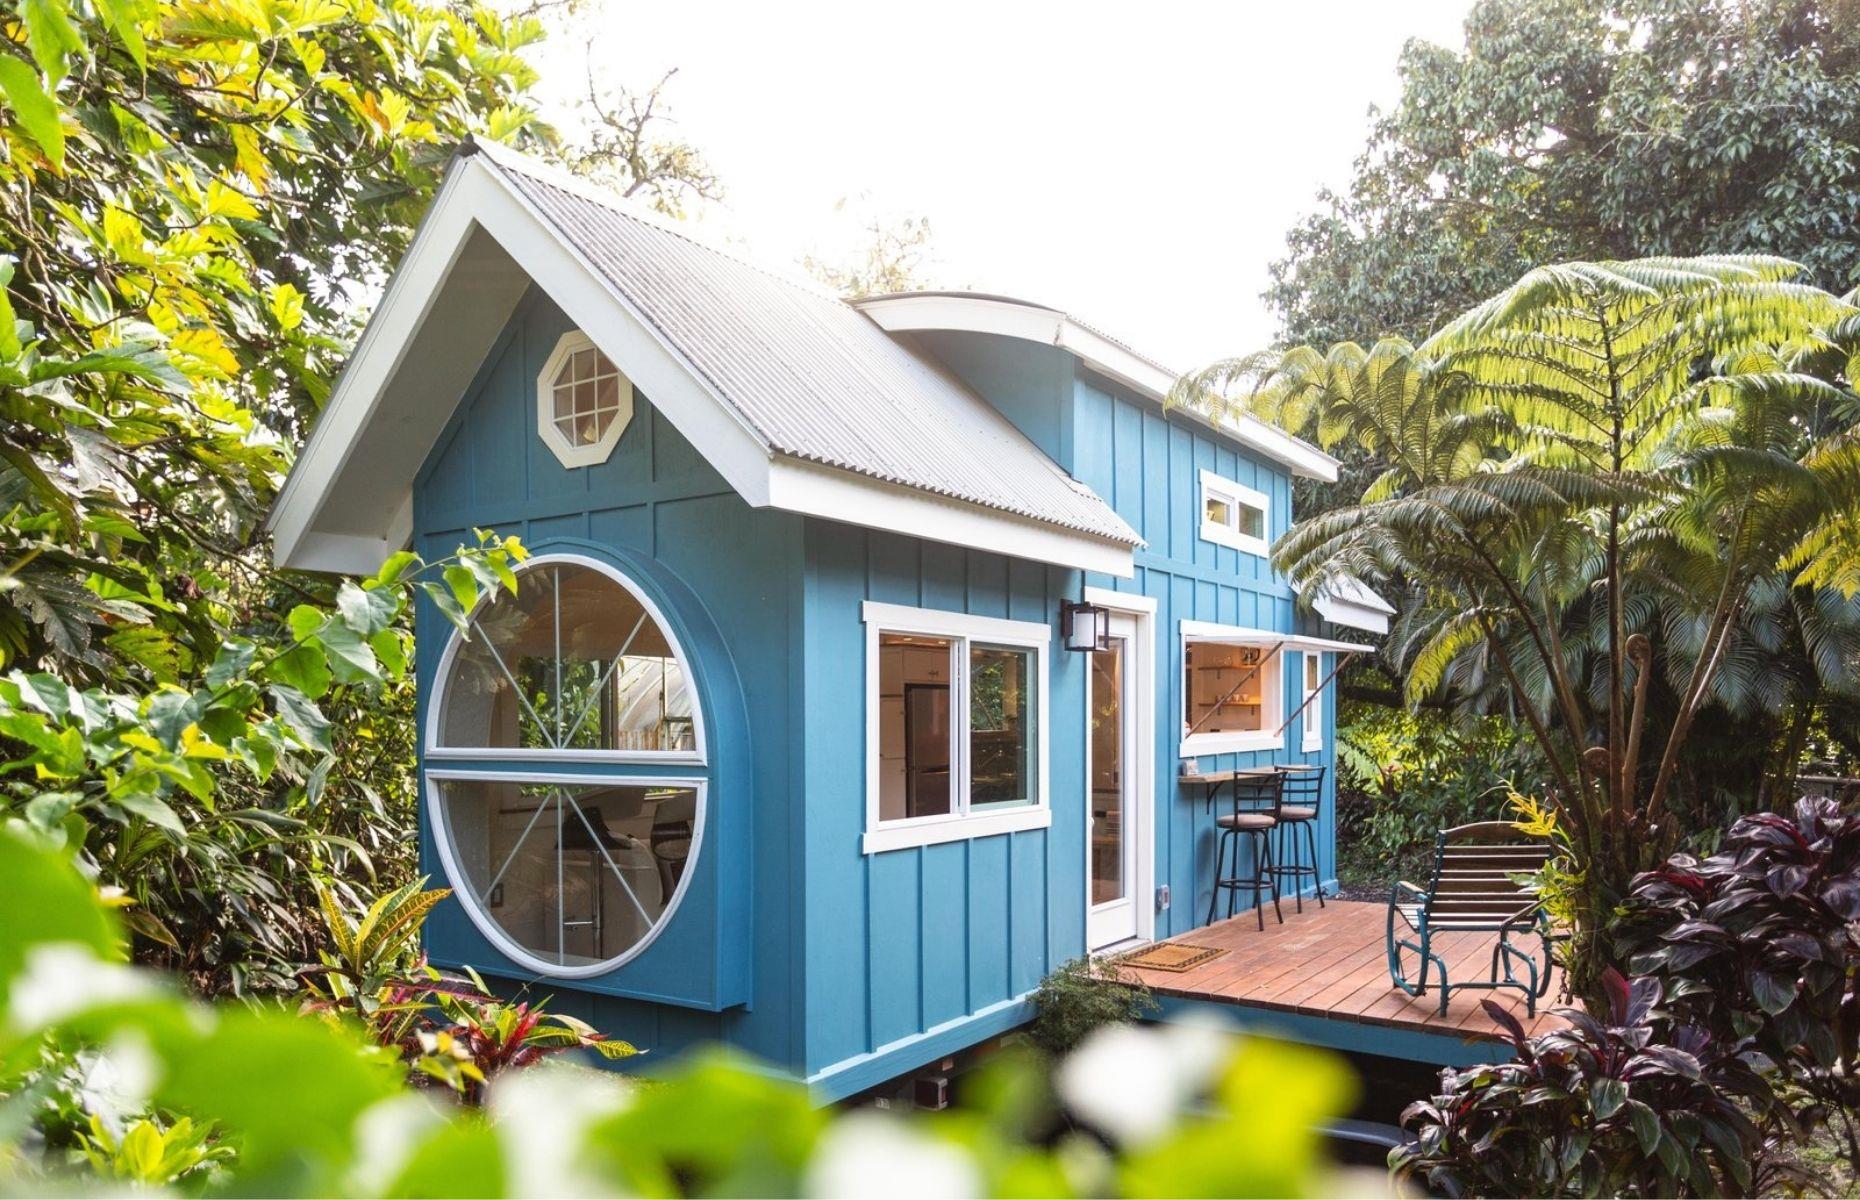 <p>We don't know about you but we think this is one of the most beautiful tiny homes in the world. Designed by brother-and-sister duo Dan and Ellie Madsen of <a href="https://www.paradisetinyhomes.com/">Paradise Tiny Homes</a>, the Oasis exemplifies the joys of the tiny house movement.</p>  <p>Based in Keaau, Hawaii, the Madsens joined forces to design and build micro-homes that truly aligned with the way their clients live. Not just practical, their tiny creations offer both freedom and happiness, without the need for compromise.</p>